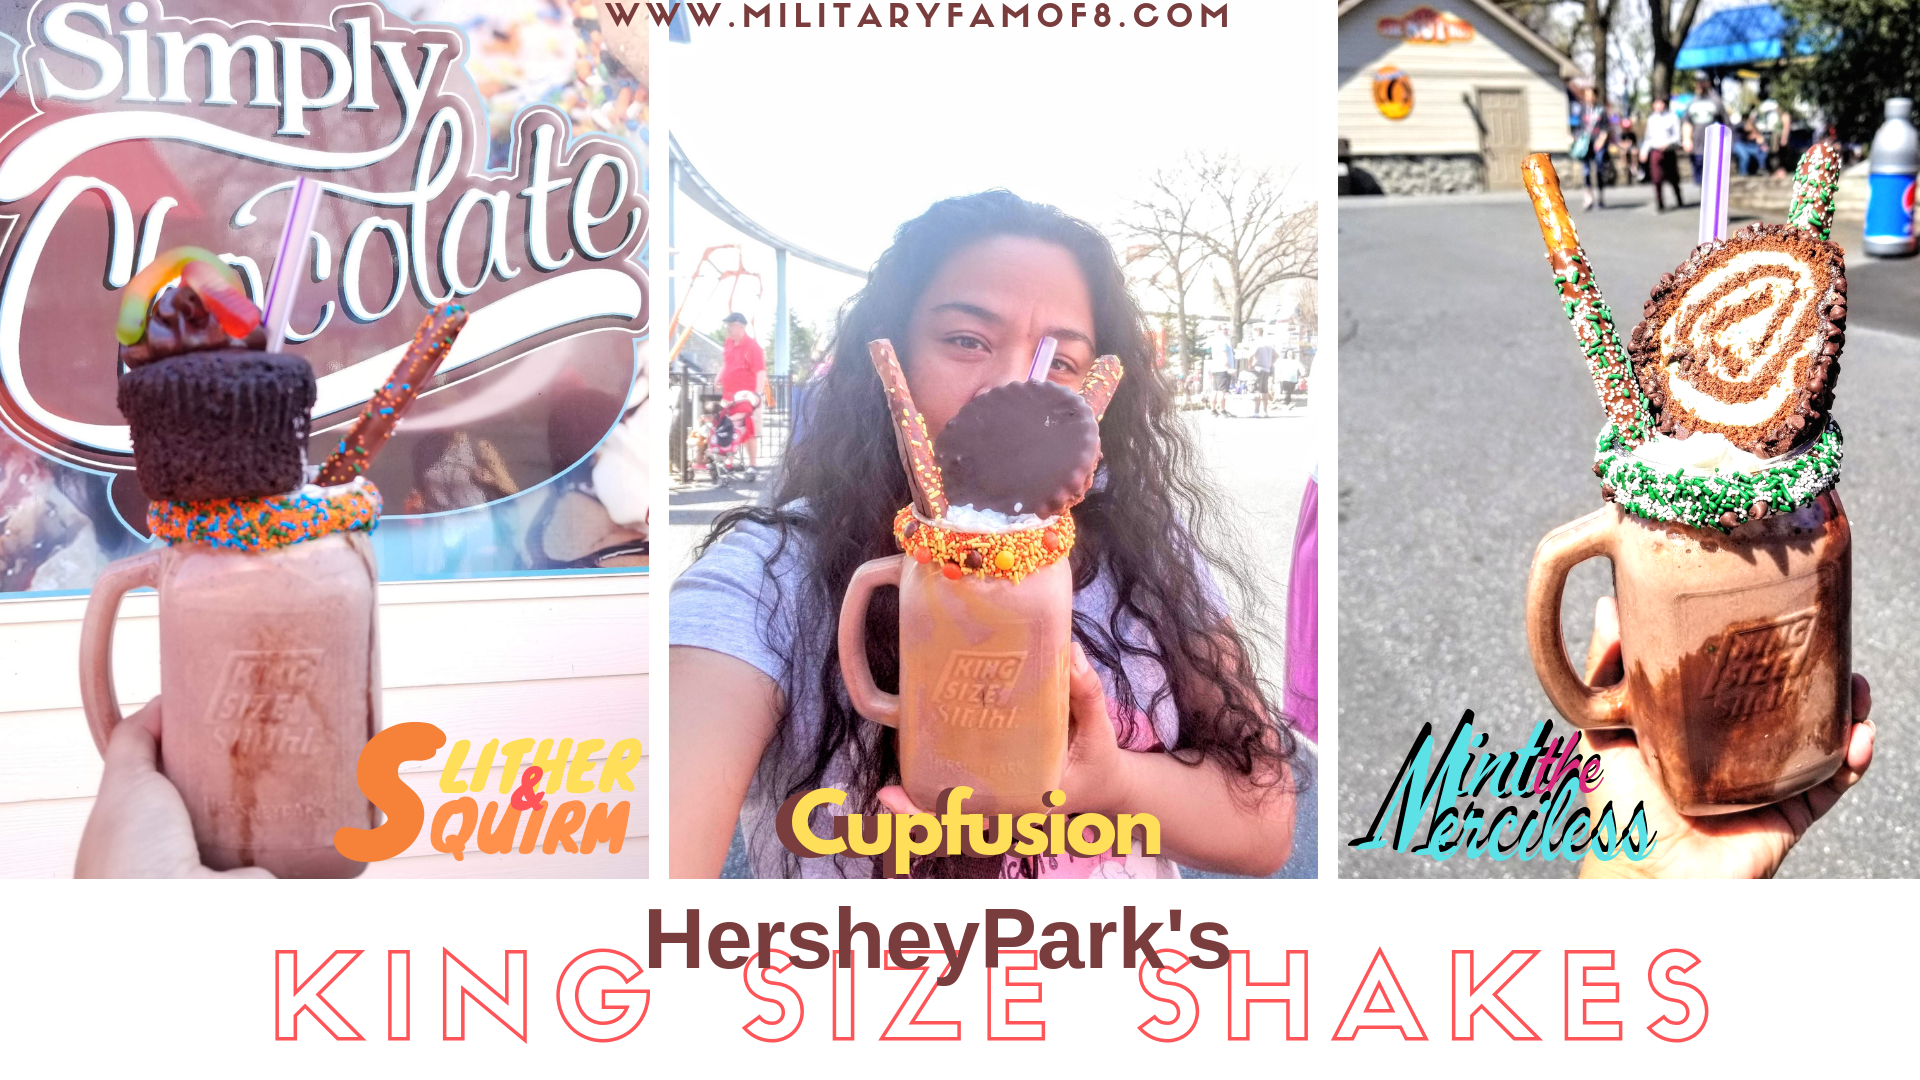 What New and Fun Things To Do & Eat in HersheyPark- Hershey, Pa.? Visiting Hershey Park and need ideas on what to do? Be ready for a #SweetWelcome. Food options are amazing, from vegan and vegetarian to kosher and gluten free; they are all delicious!